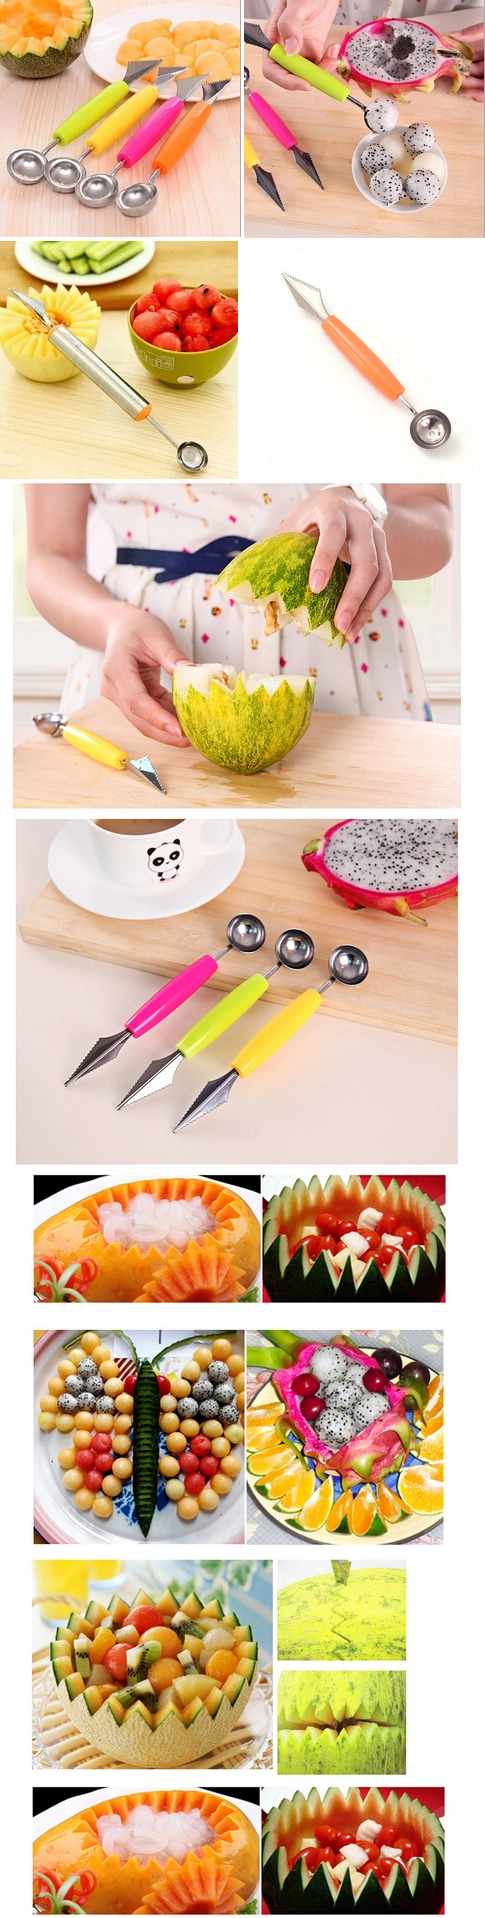 Stainless Steel Fruit Carving Knif